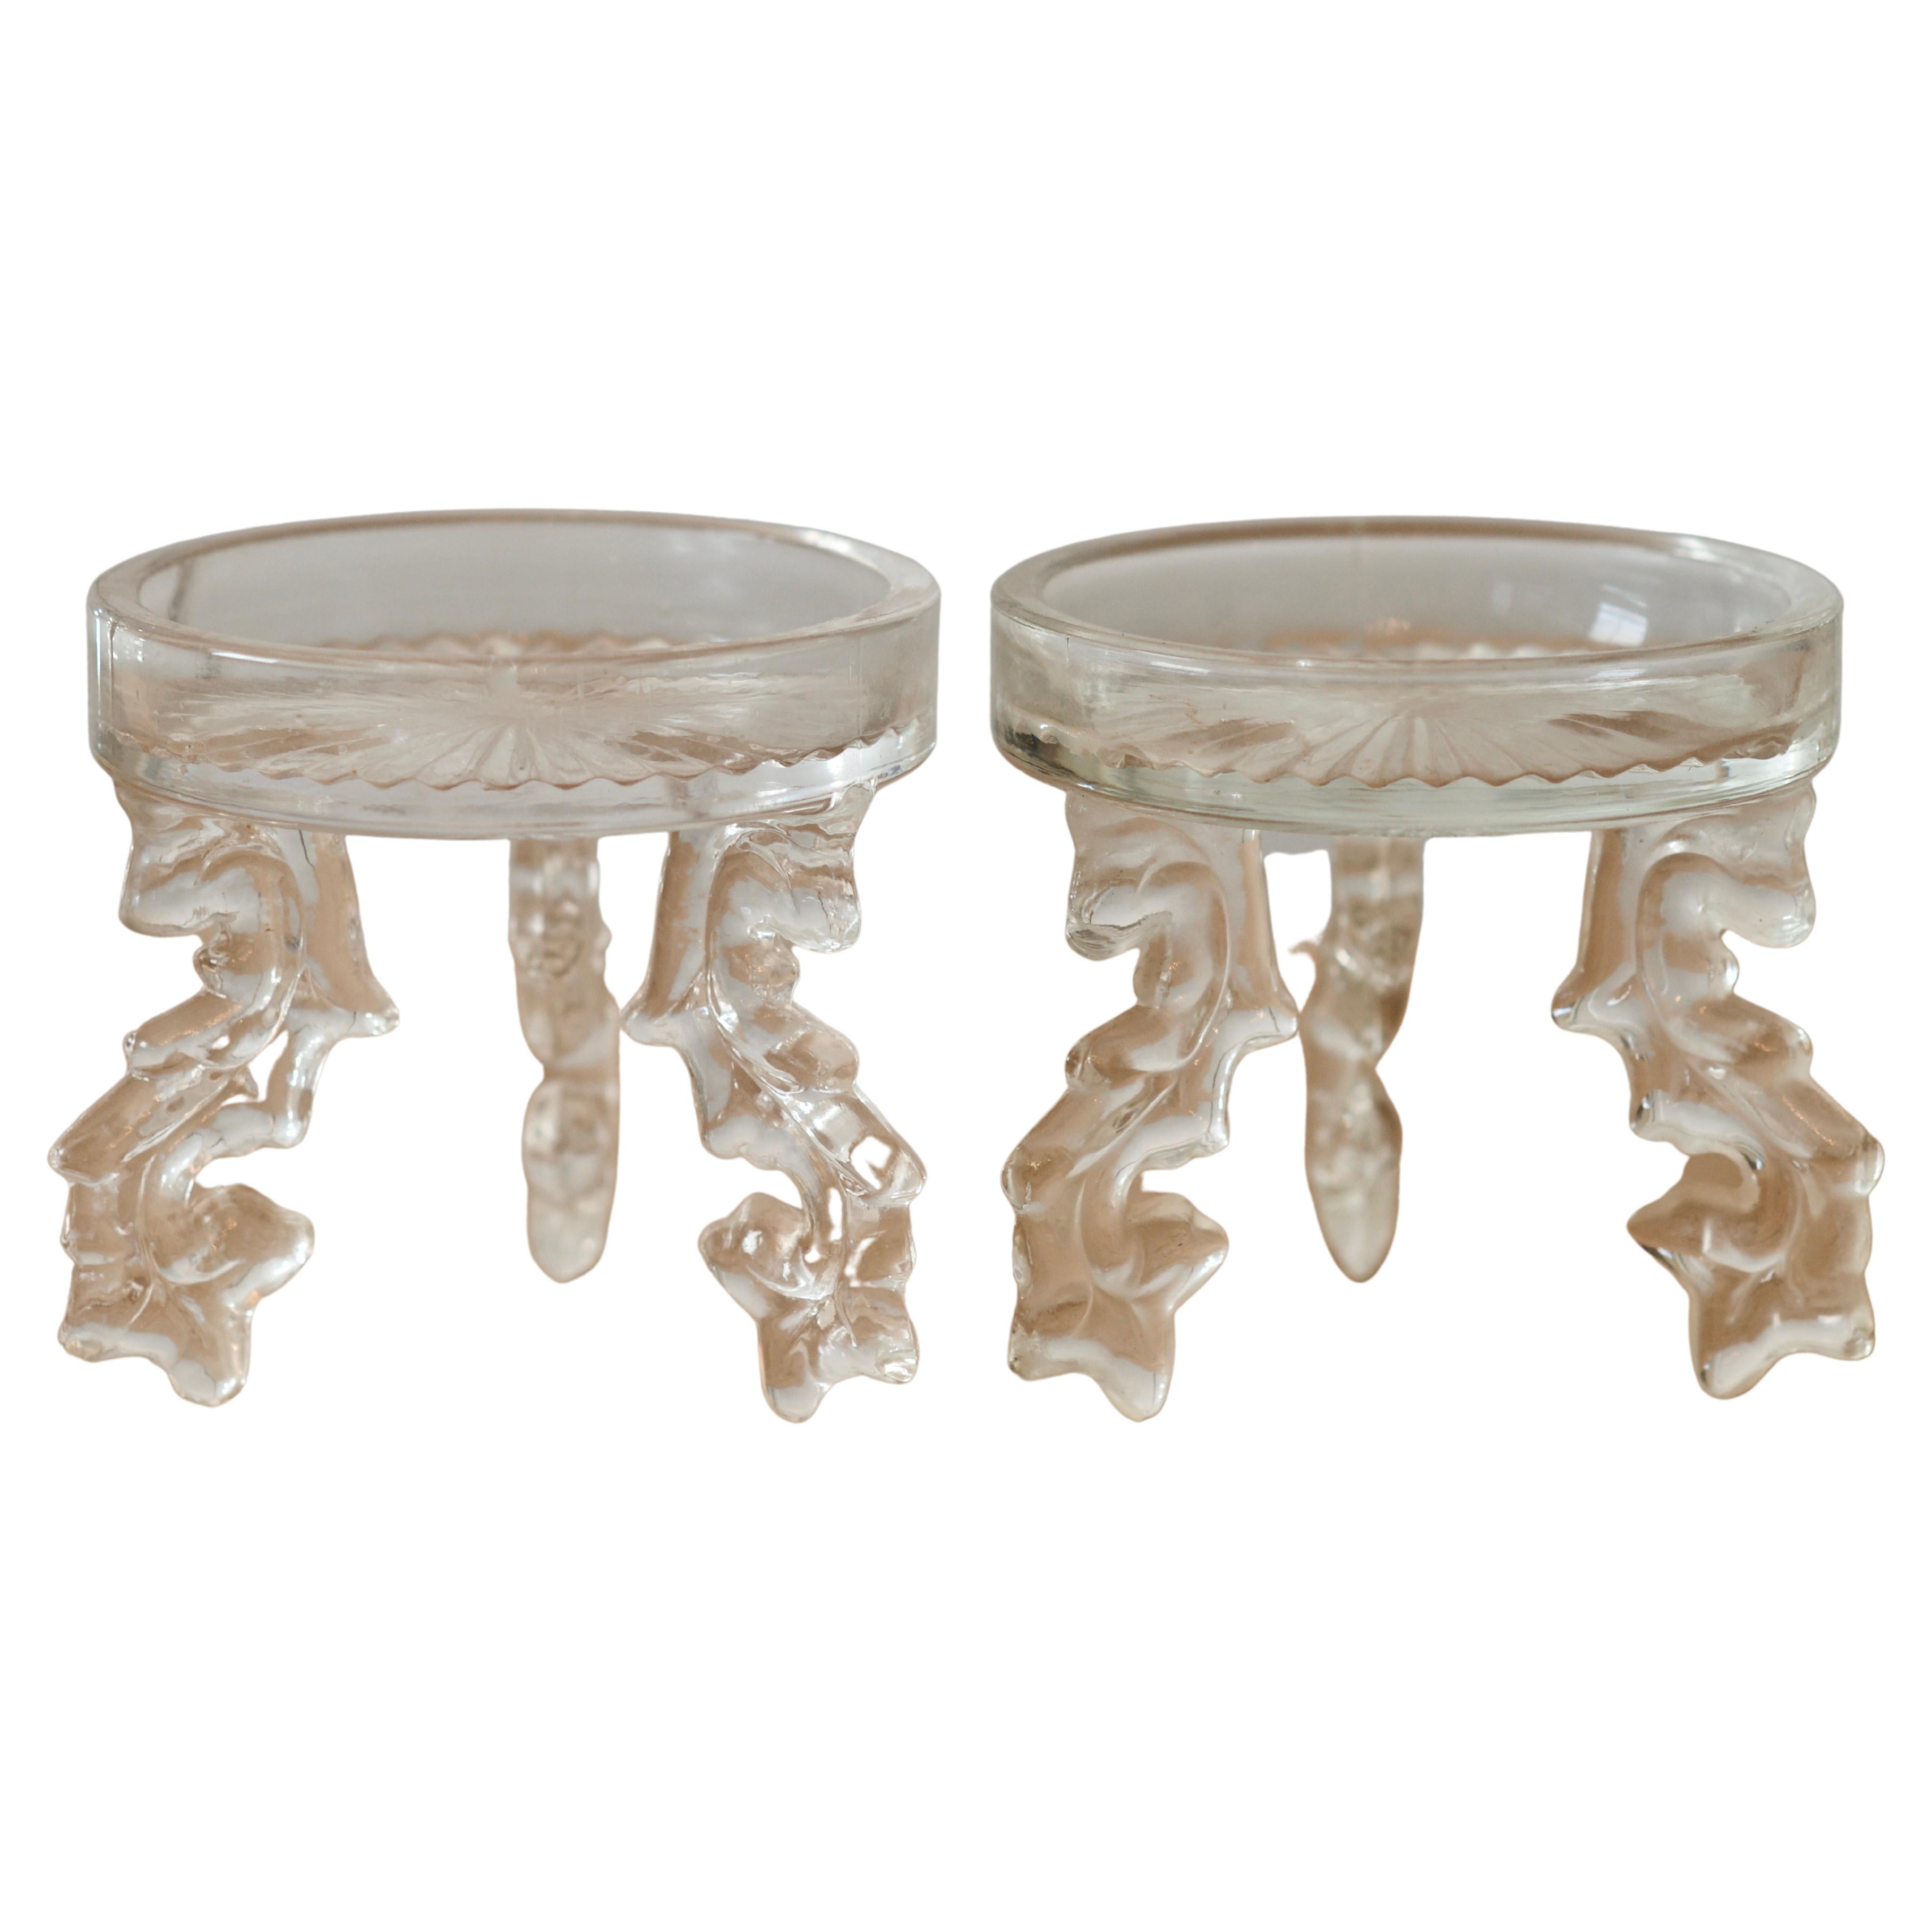 1980s Chinoiserie Pedestal Glass Pillar Asian Candle Holders - a Pair For Sale